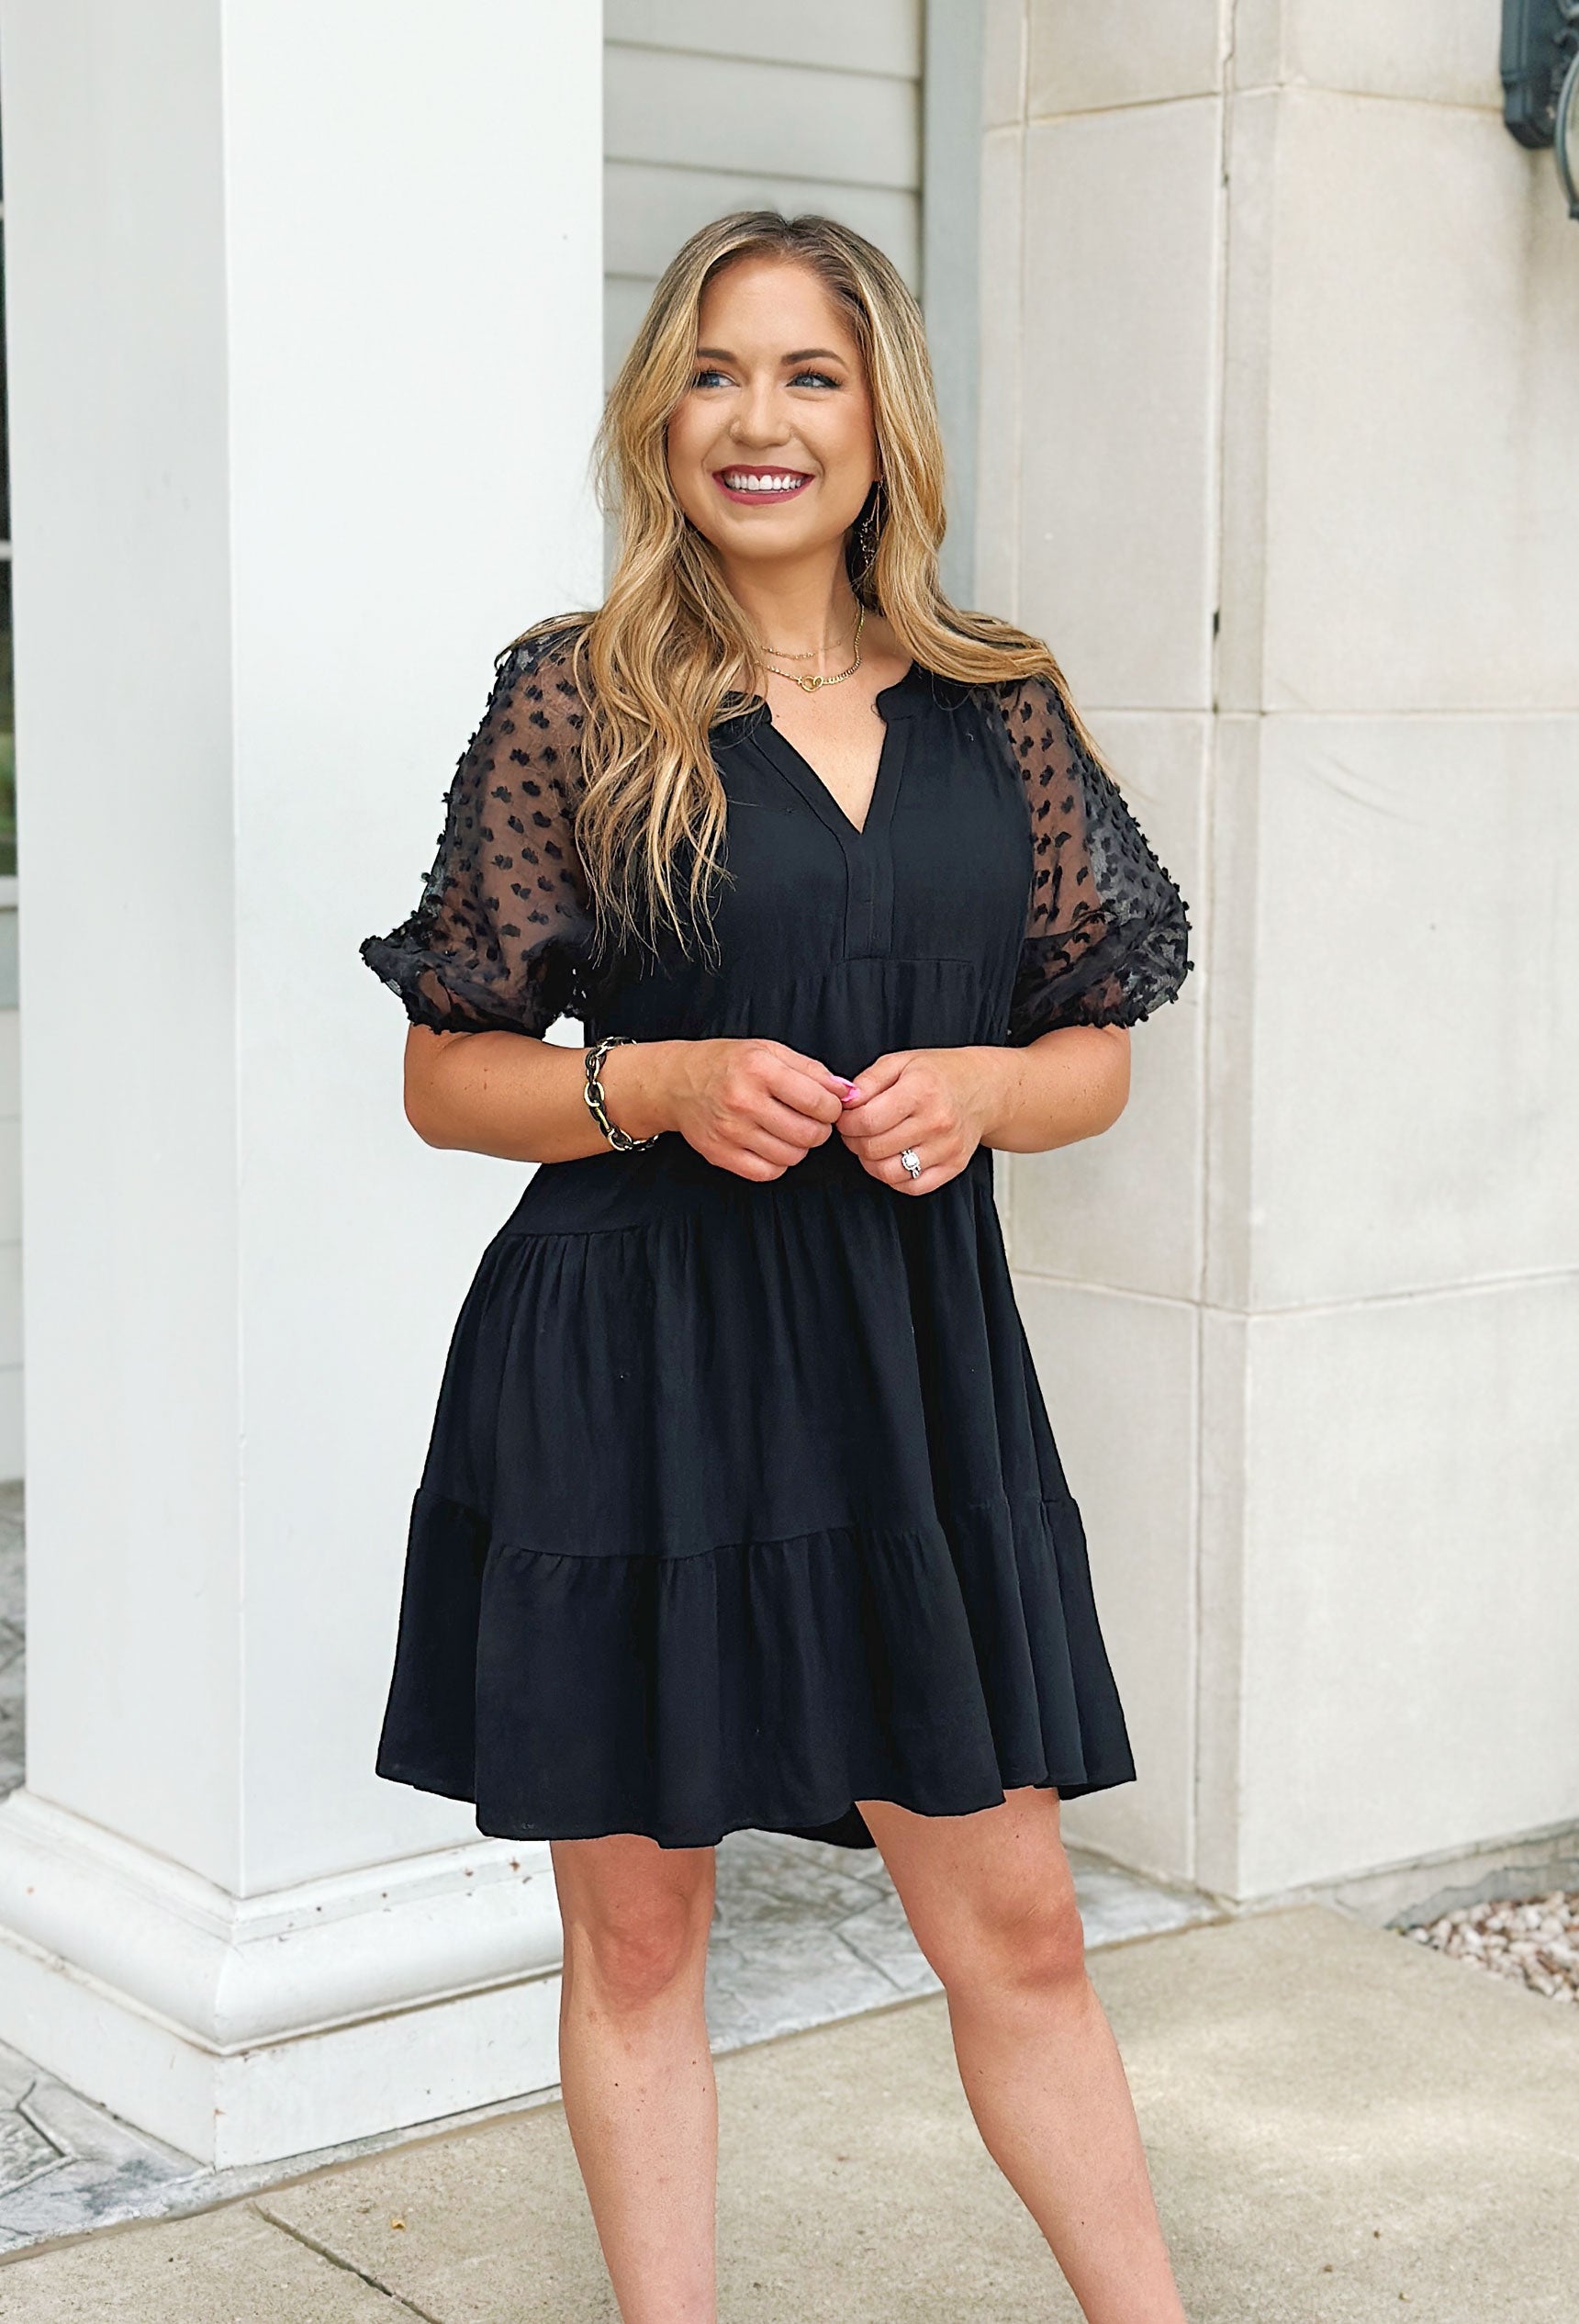 Meet Me In Paris Dress, Black tiered puff sleeve v-neck dress. Sleeves are sheer with textured puffs 